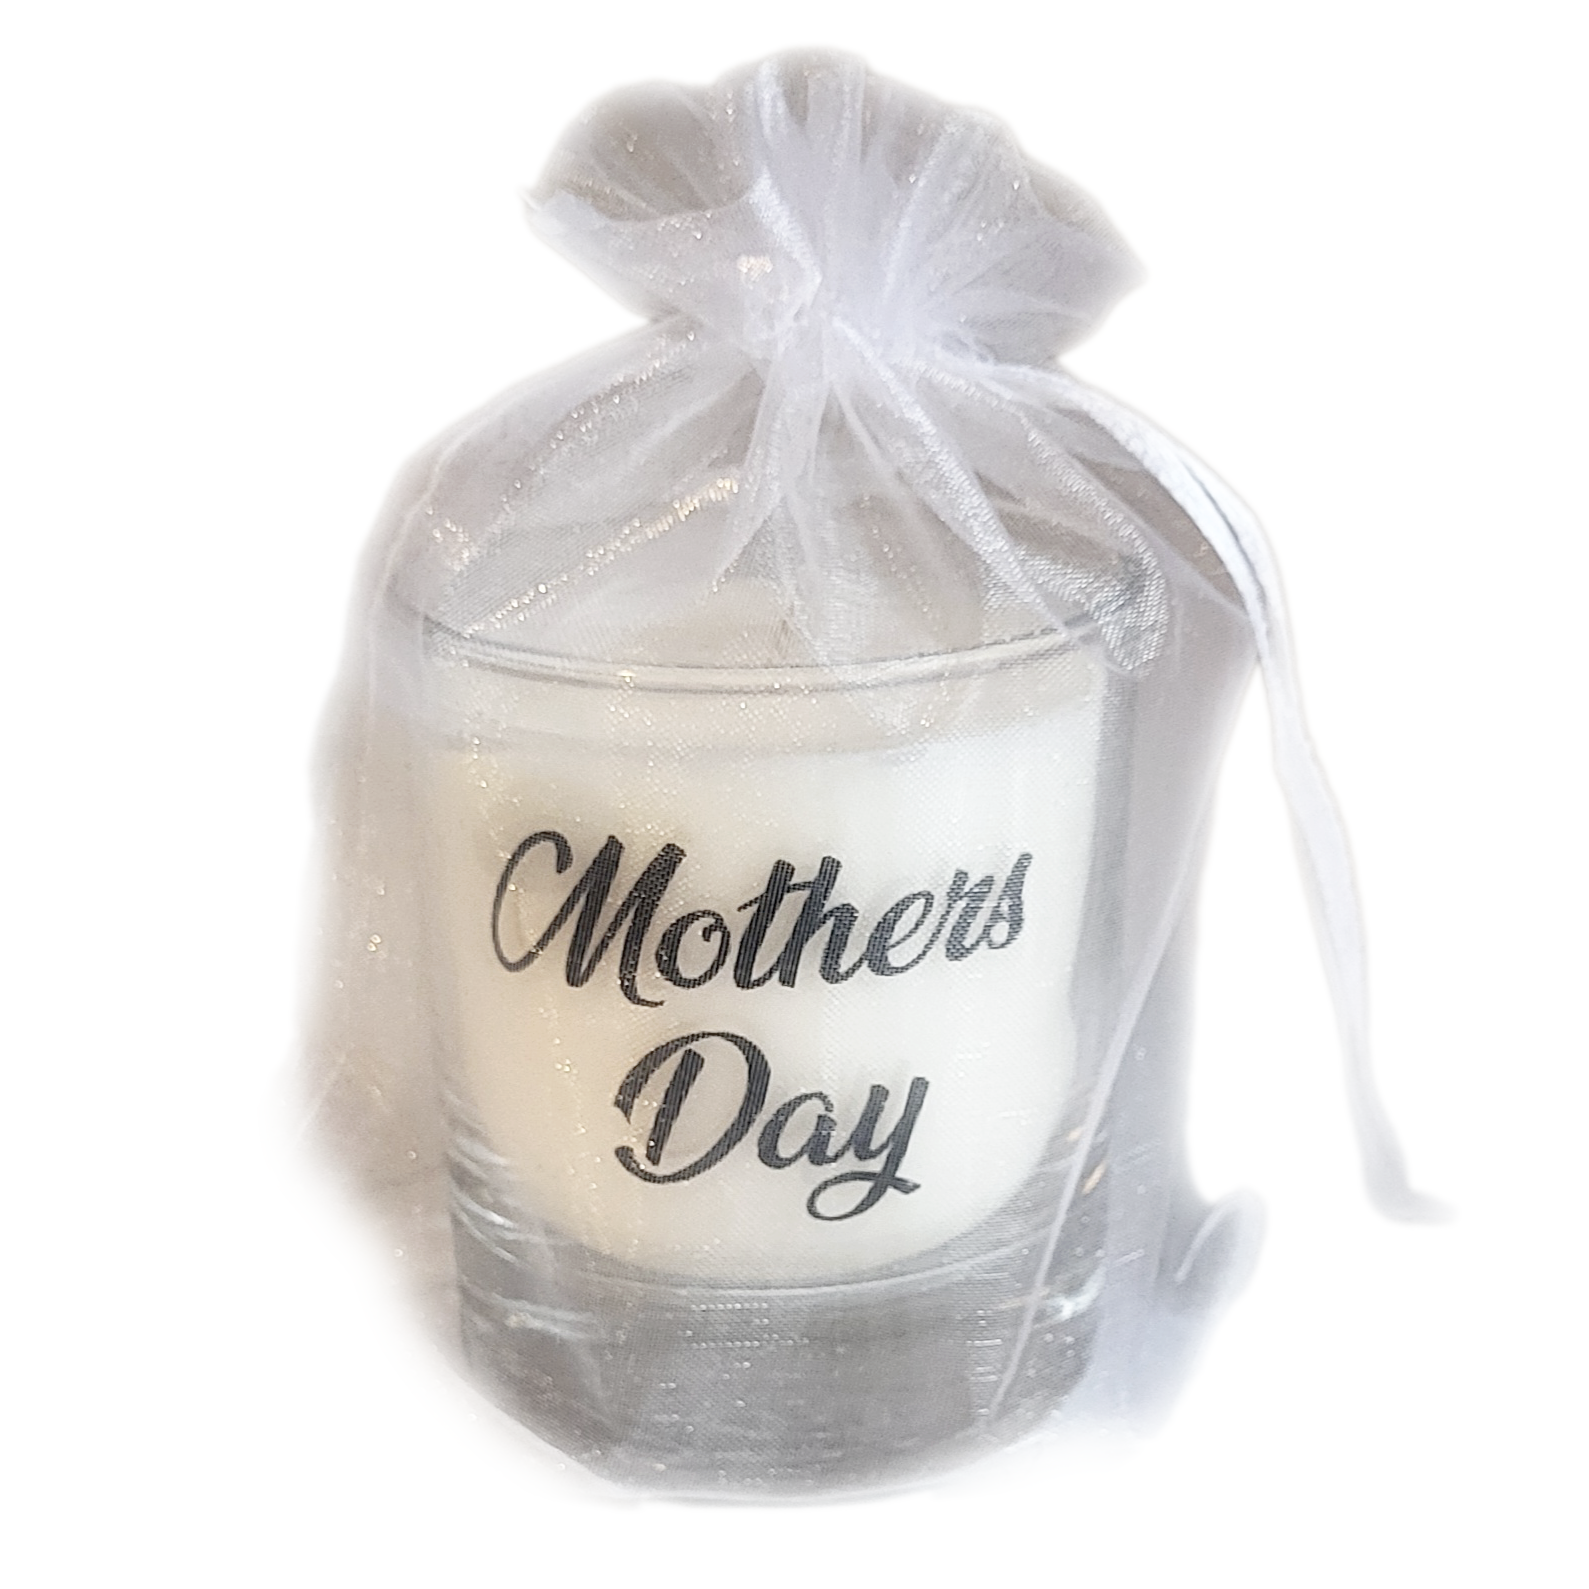 Mother's Day Candle 20cl (SPECIAL OFFER)